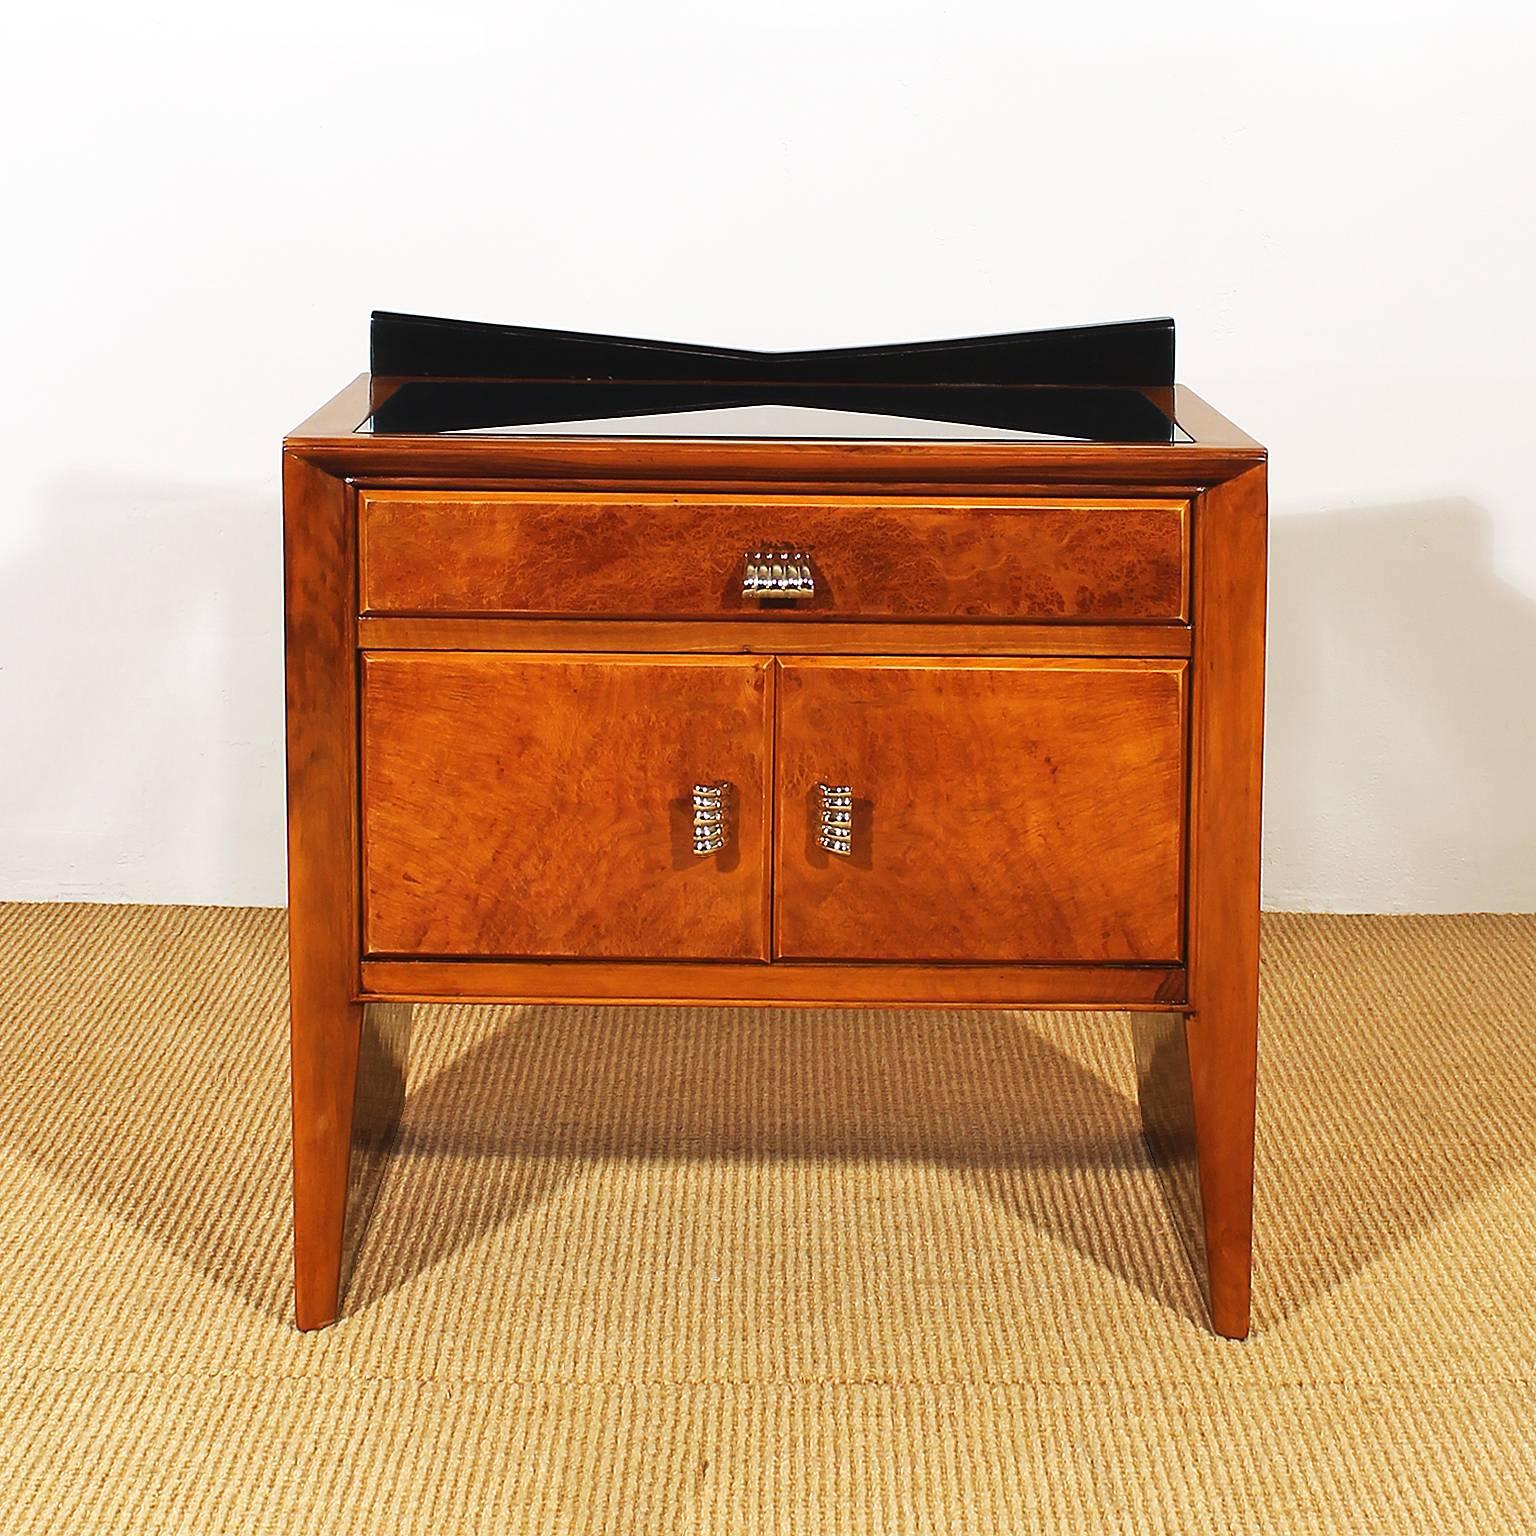 Pair of Art Deco cubist night stands, walnut and elm burr veneer, black lacquered decorative element and black glass on top, French polish, nickel-plated bronze handles,
Italy, circa 1930.